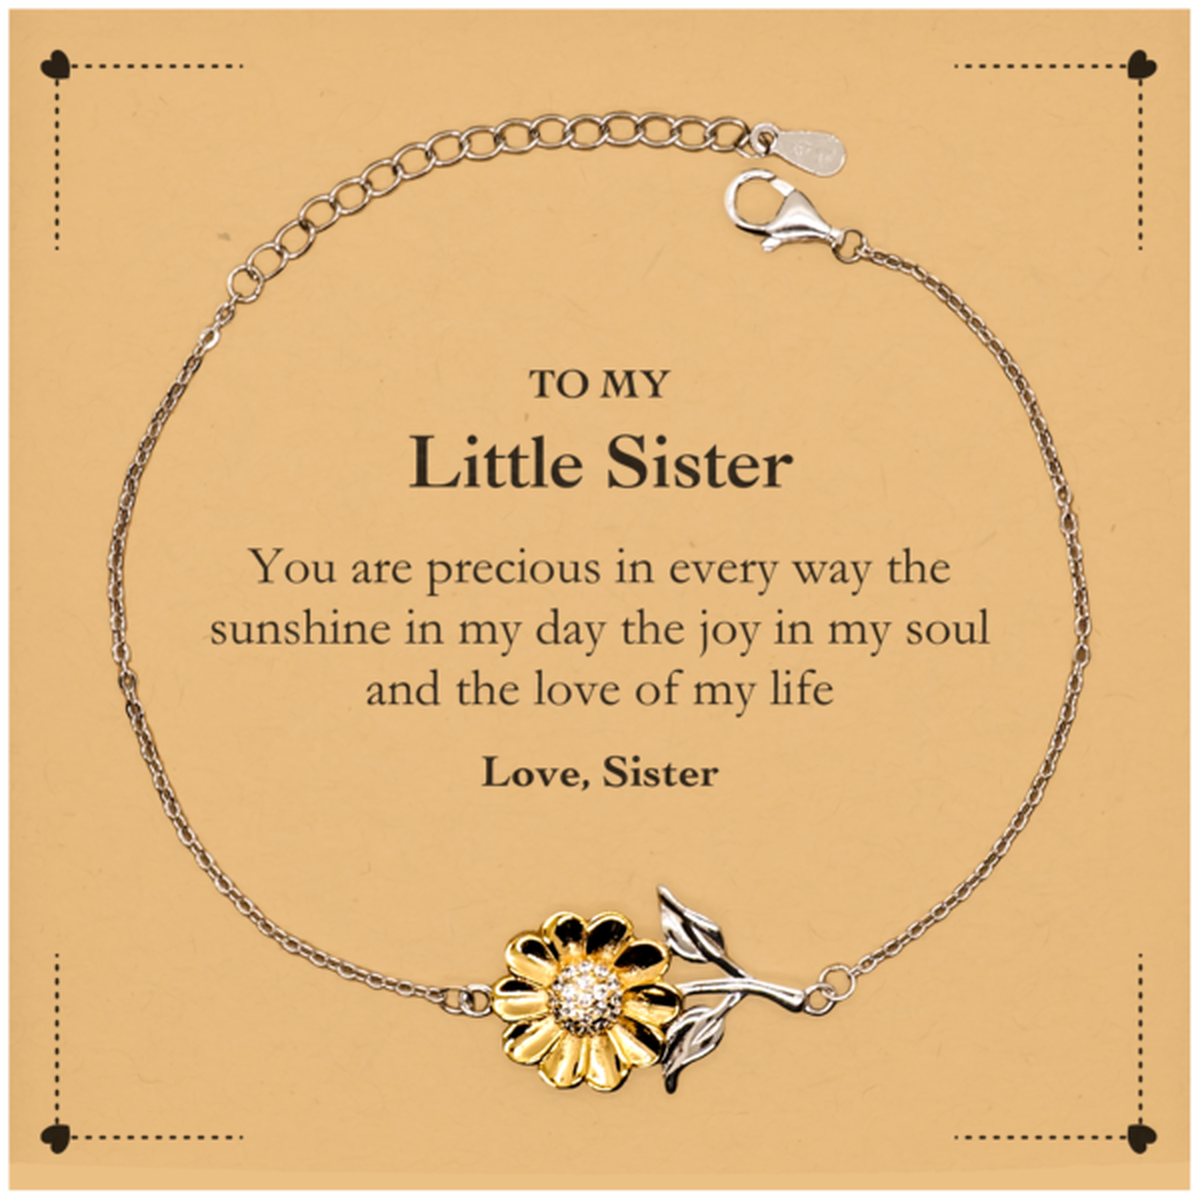 Graduation Gifts for Little Sister Sunflower Bracelet Present from Sister, Christmas Little Sister Birthday Gifts Little Sister You are precious in every way the sunshine in my day. Love, Sister